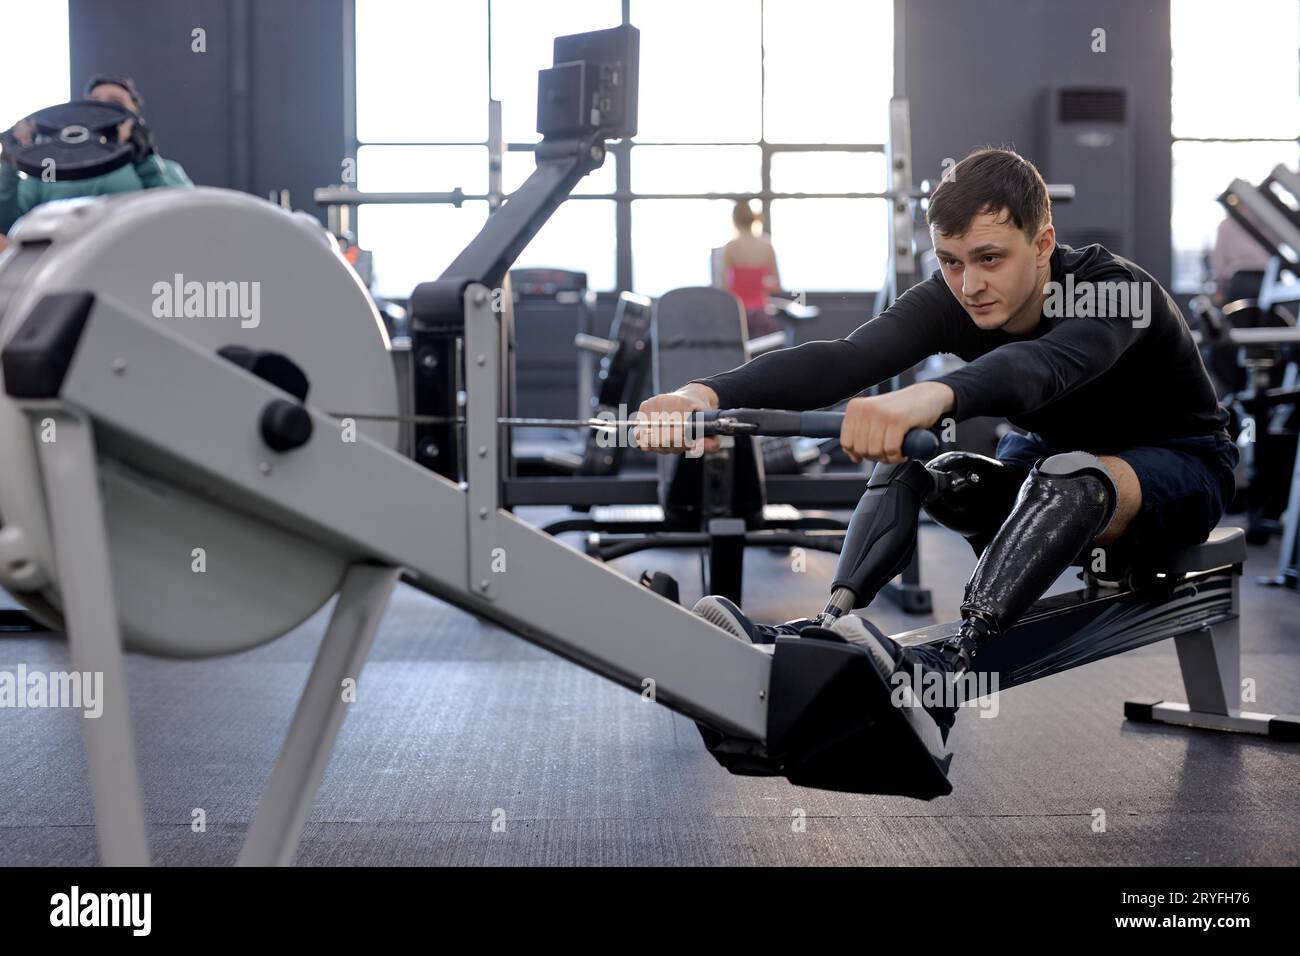 sportsman focuses on working out with stationary cardiovascular exercise machine, full length side view shot Stock Photo